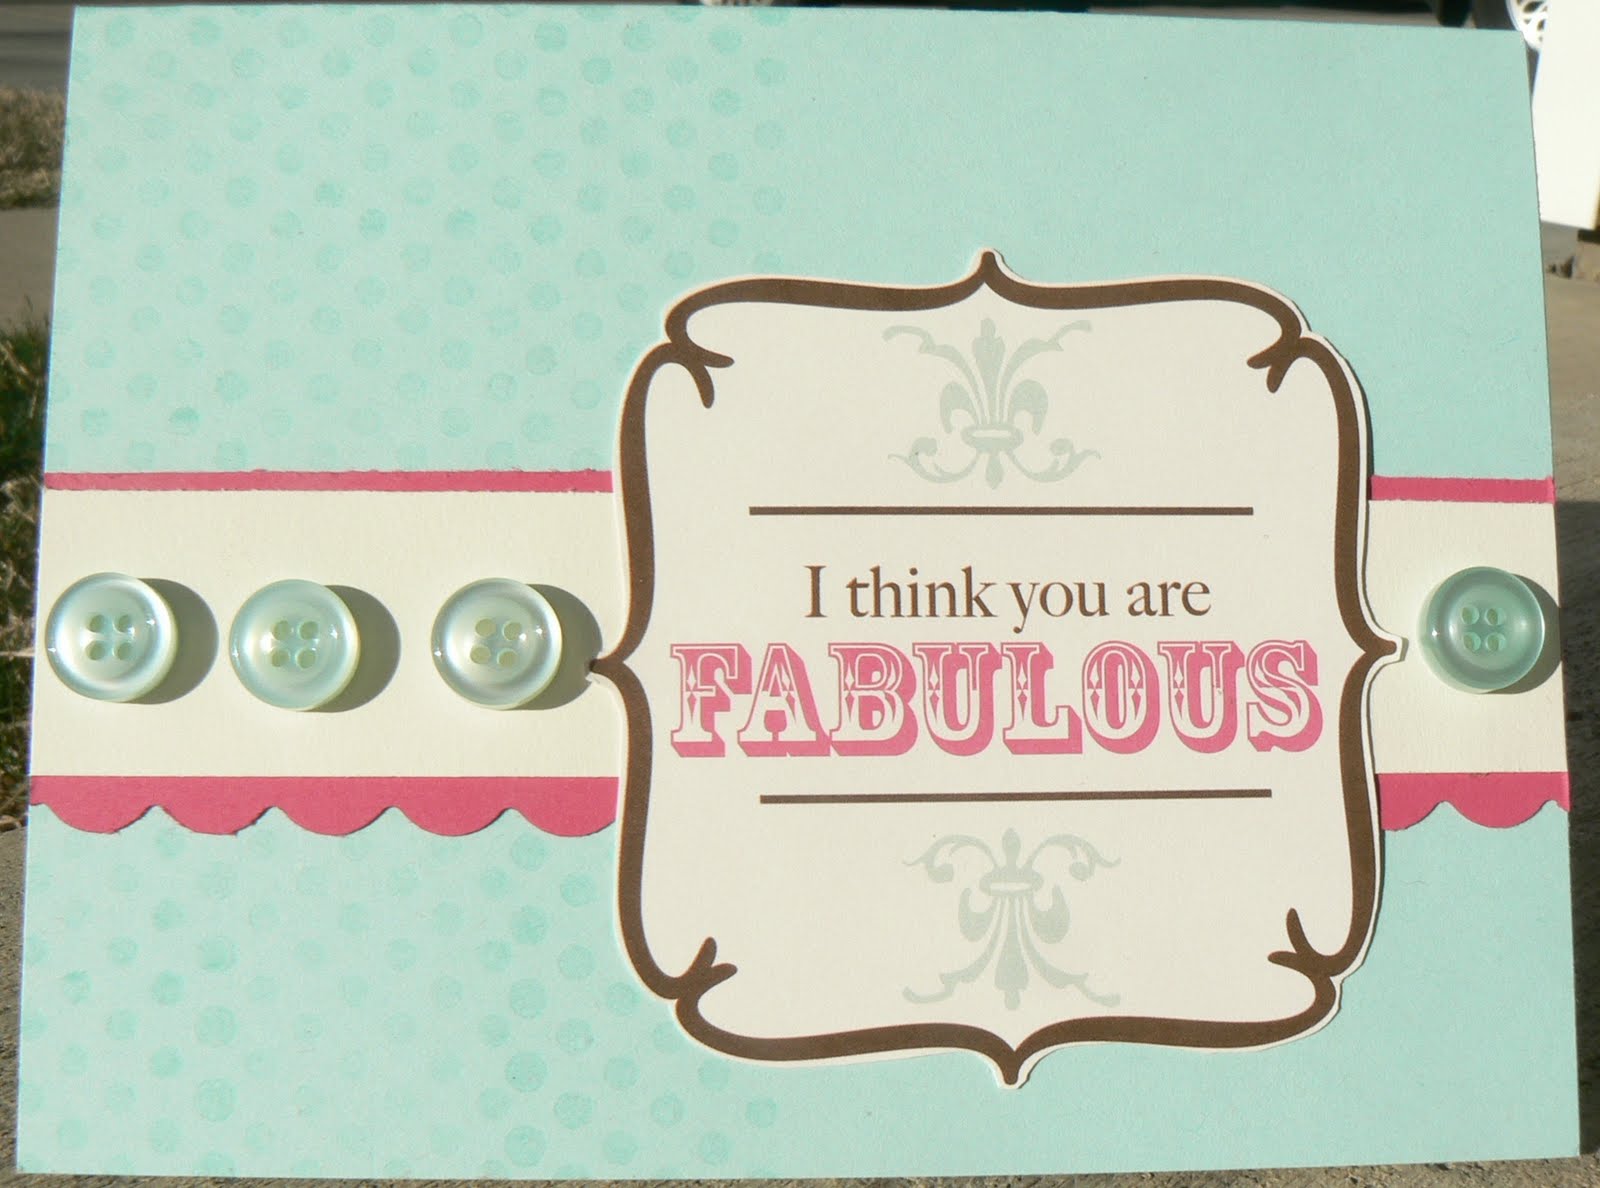 [i+think+you+are+fabulous.JPG]